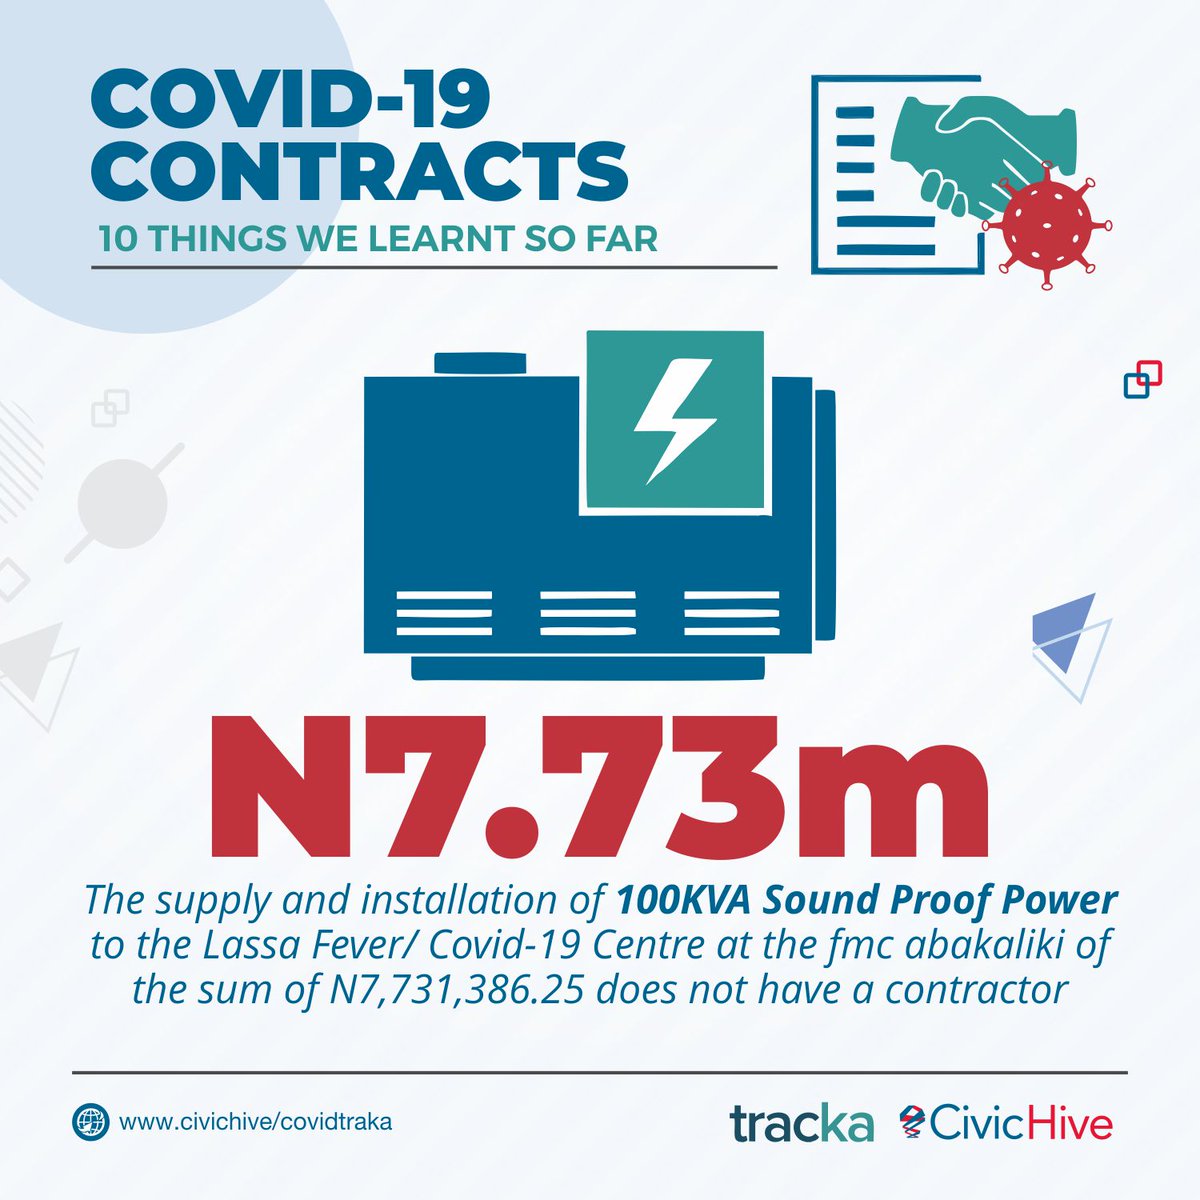 FMC Abakaliki bought and installed a 100KVA Generator without a contractor!  #CovidFunds  #AskQuestions